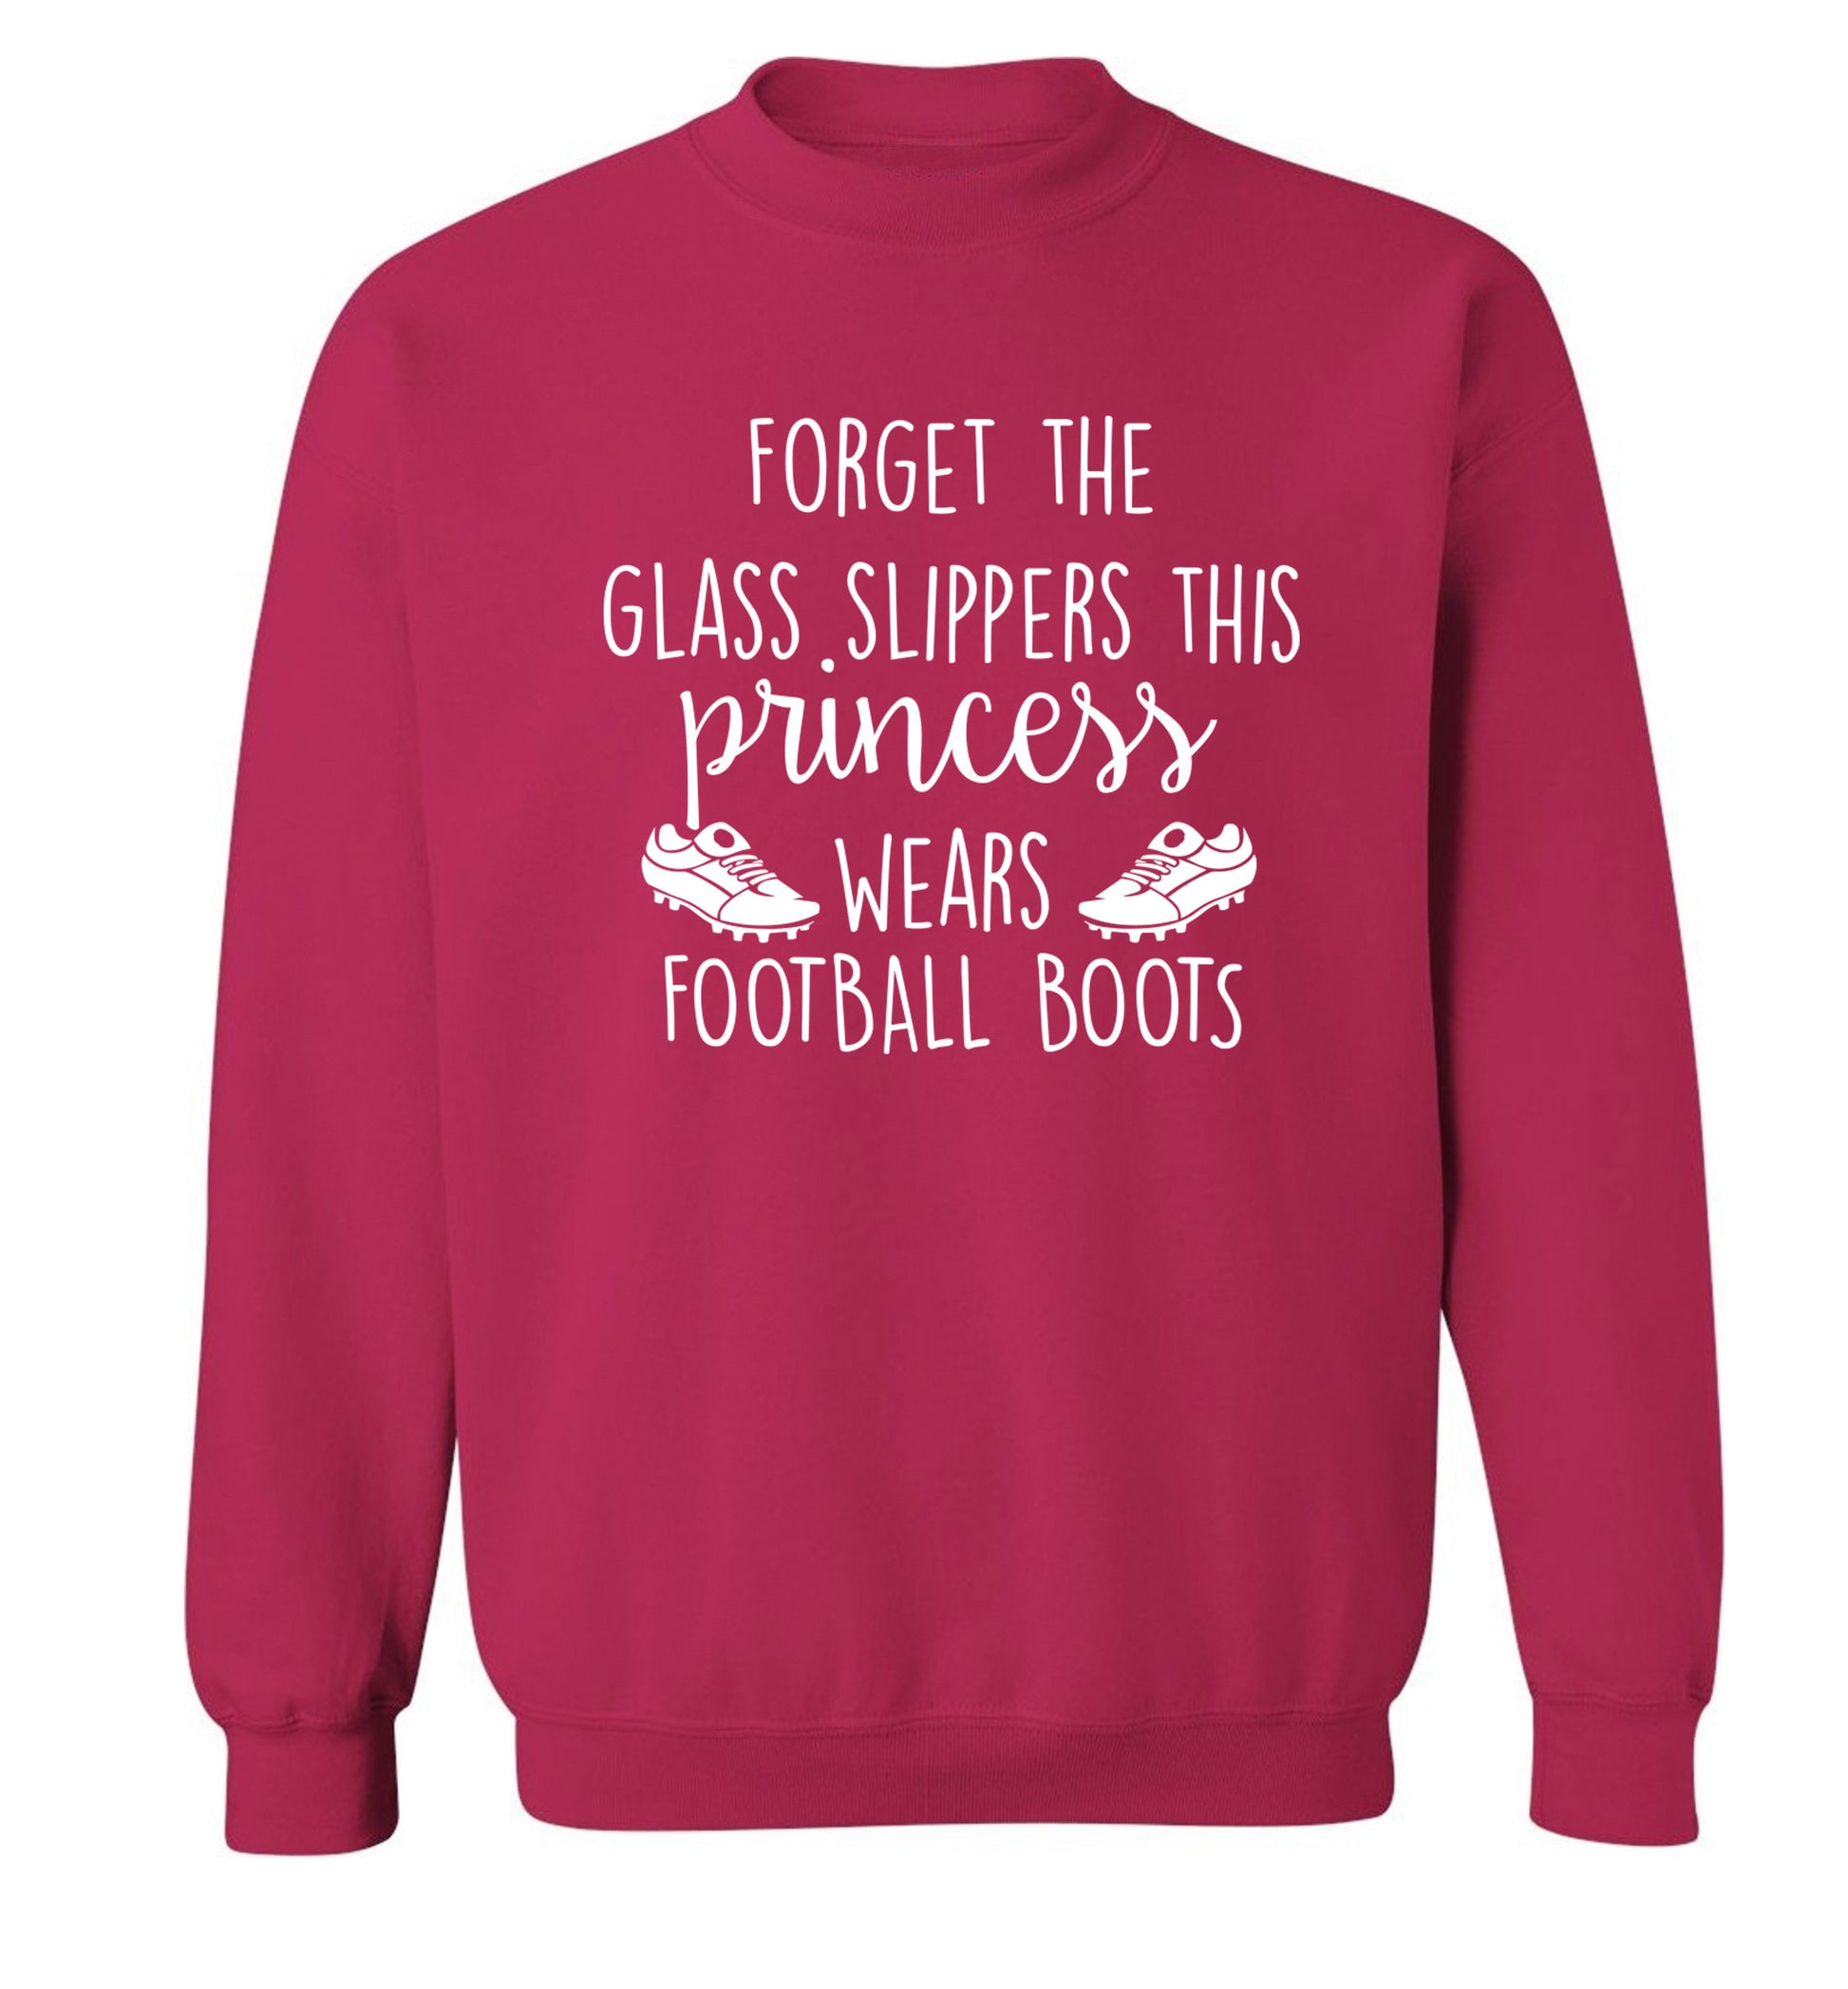 Forget the glass slippers this princess wears football boots Adult's unisex pink Sweater 2XL